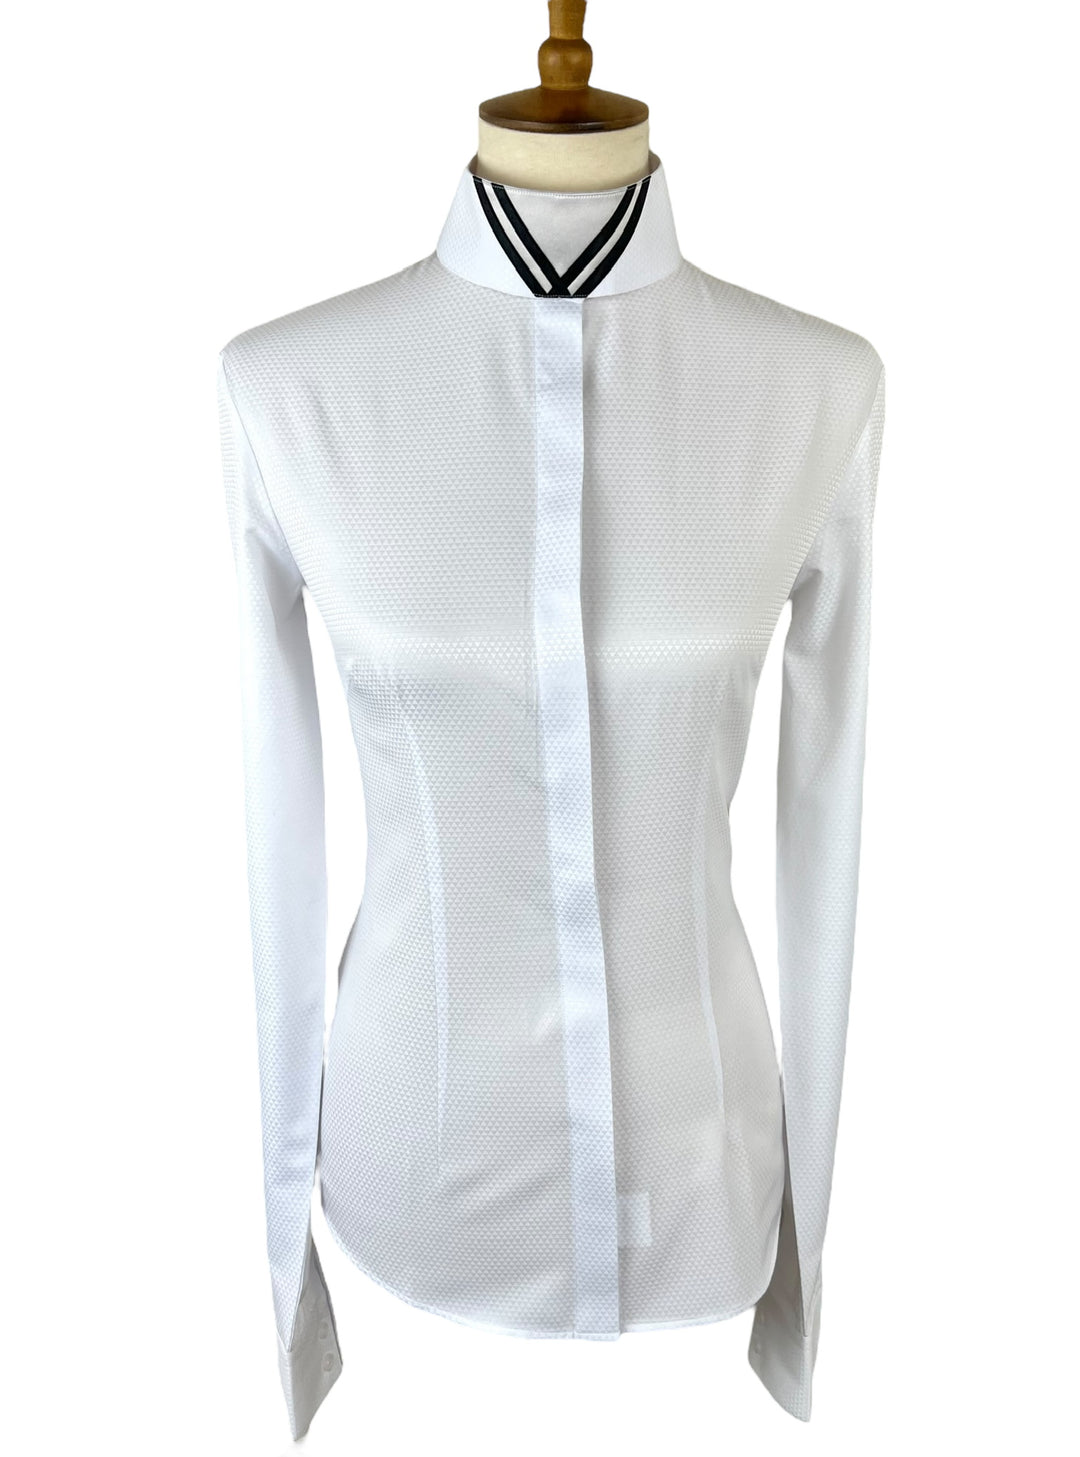 White Hunt Shirt with Black & Silver Accents (Size 34)